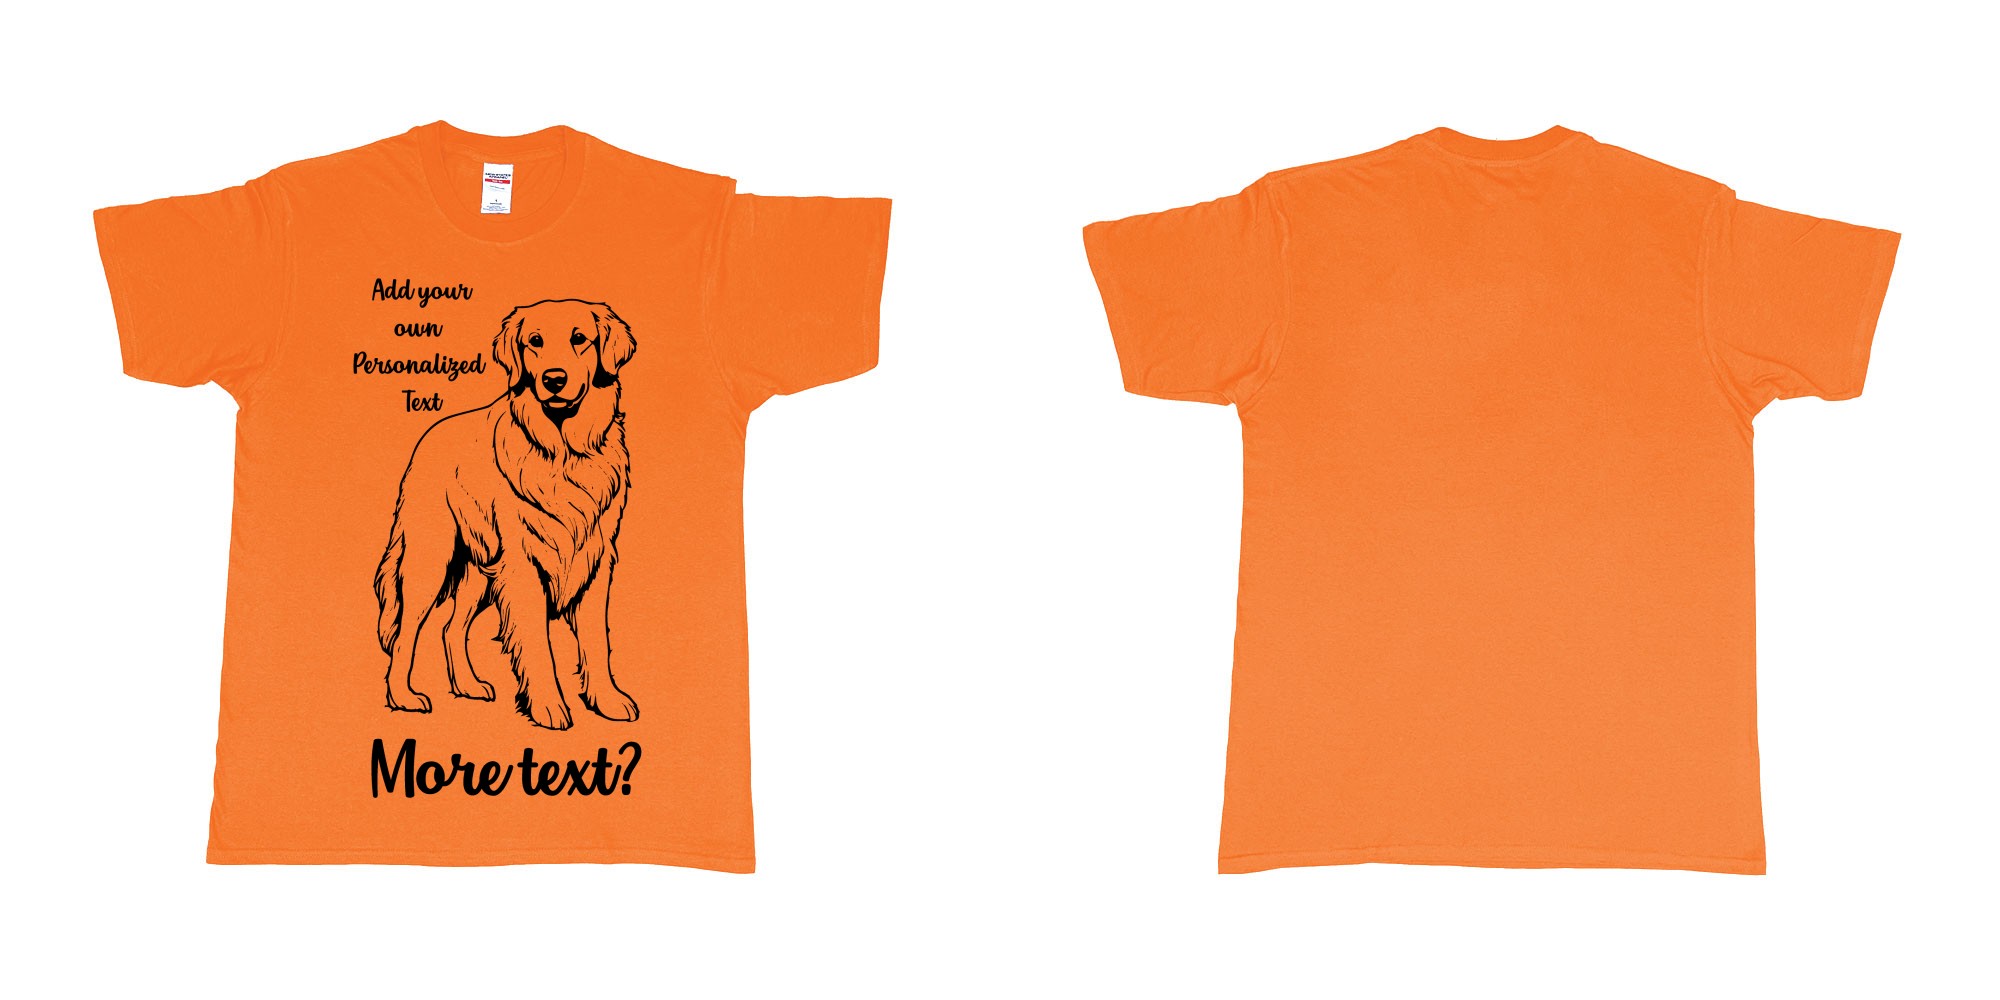 Custom tshirt design golden retriever dog breed personalized text in fabric color orange choice your own text made in Bali by The Pirate Way